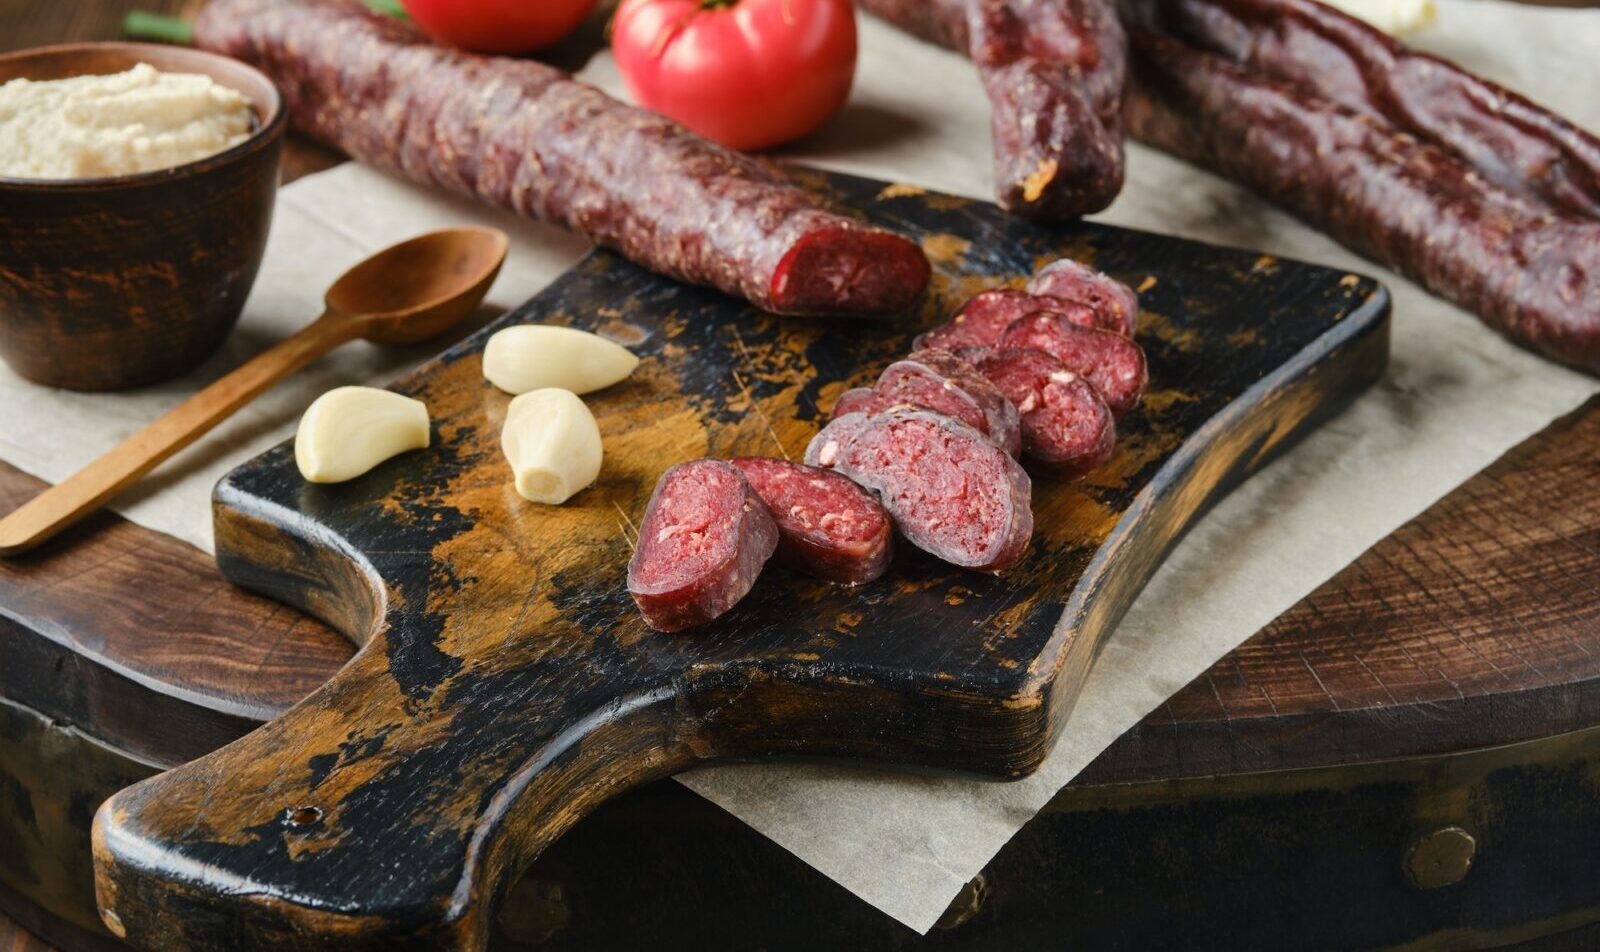 Dried sausage made of venison spicy meat